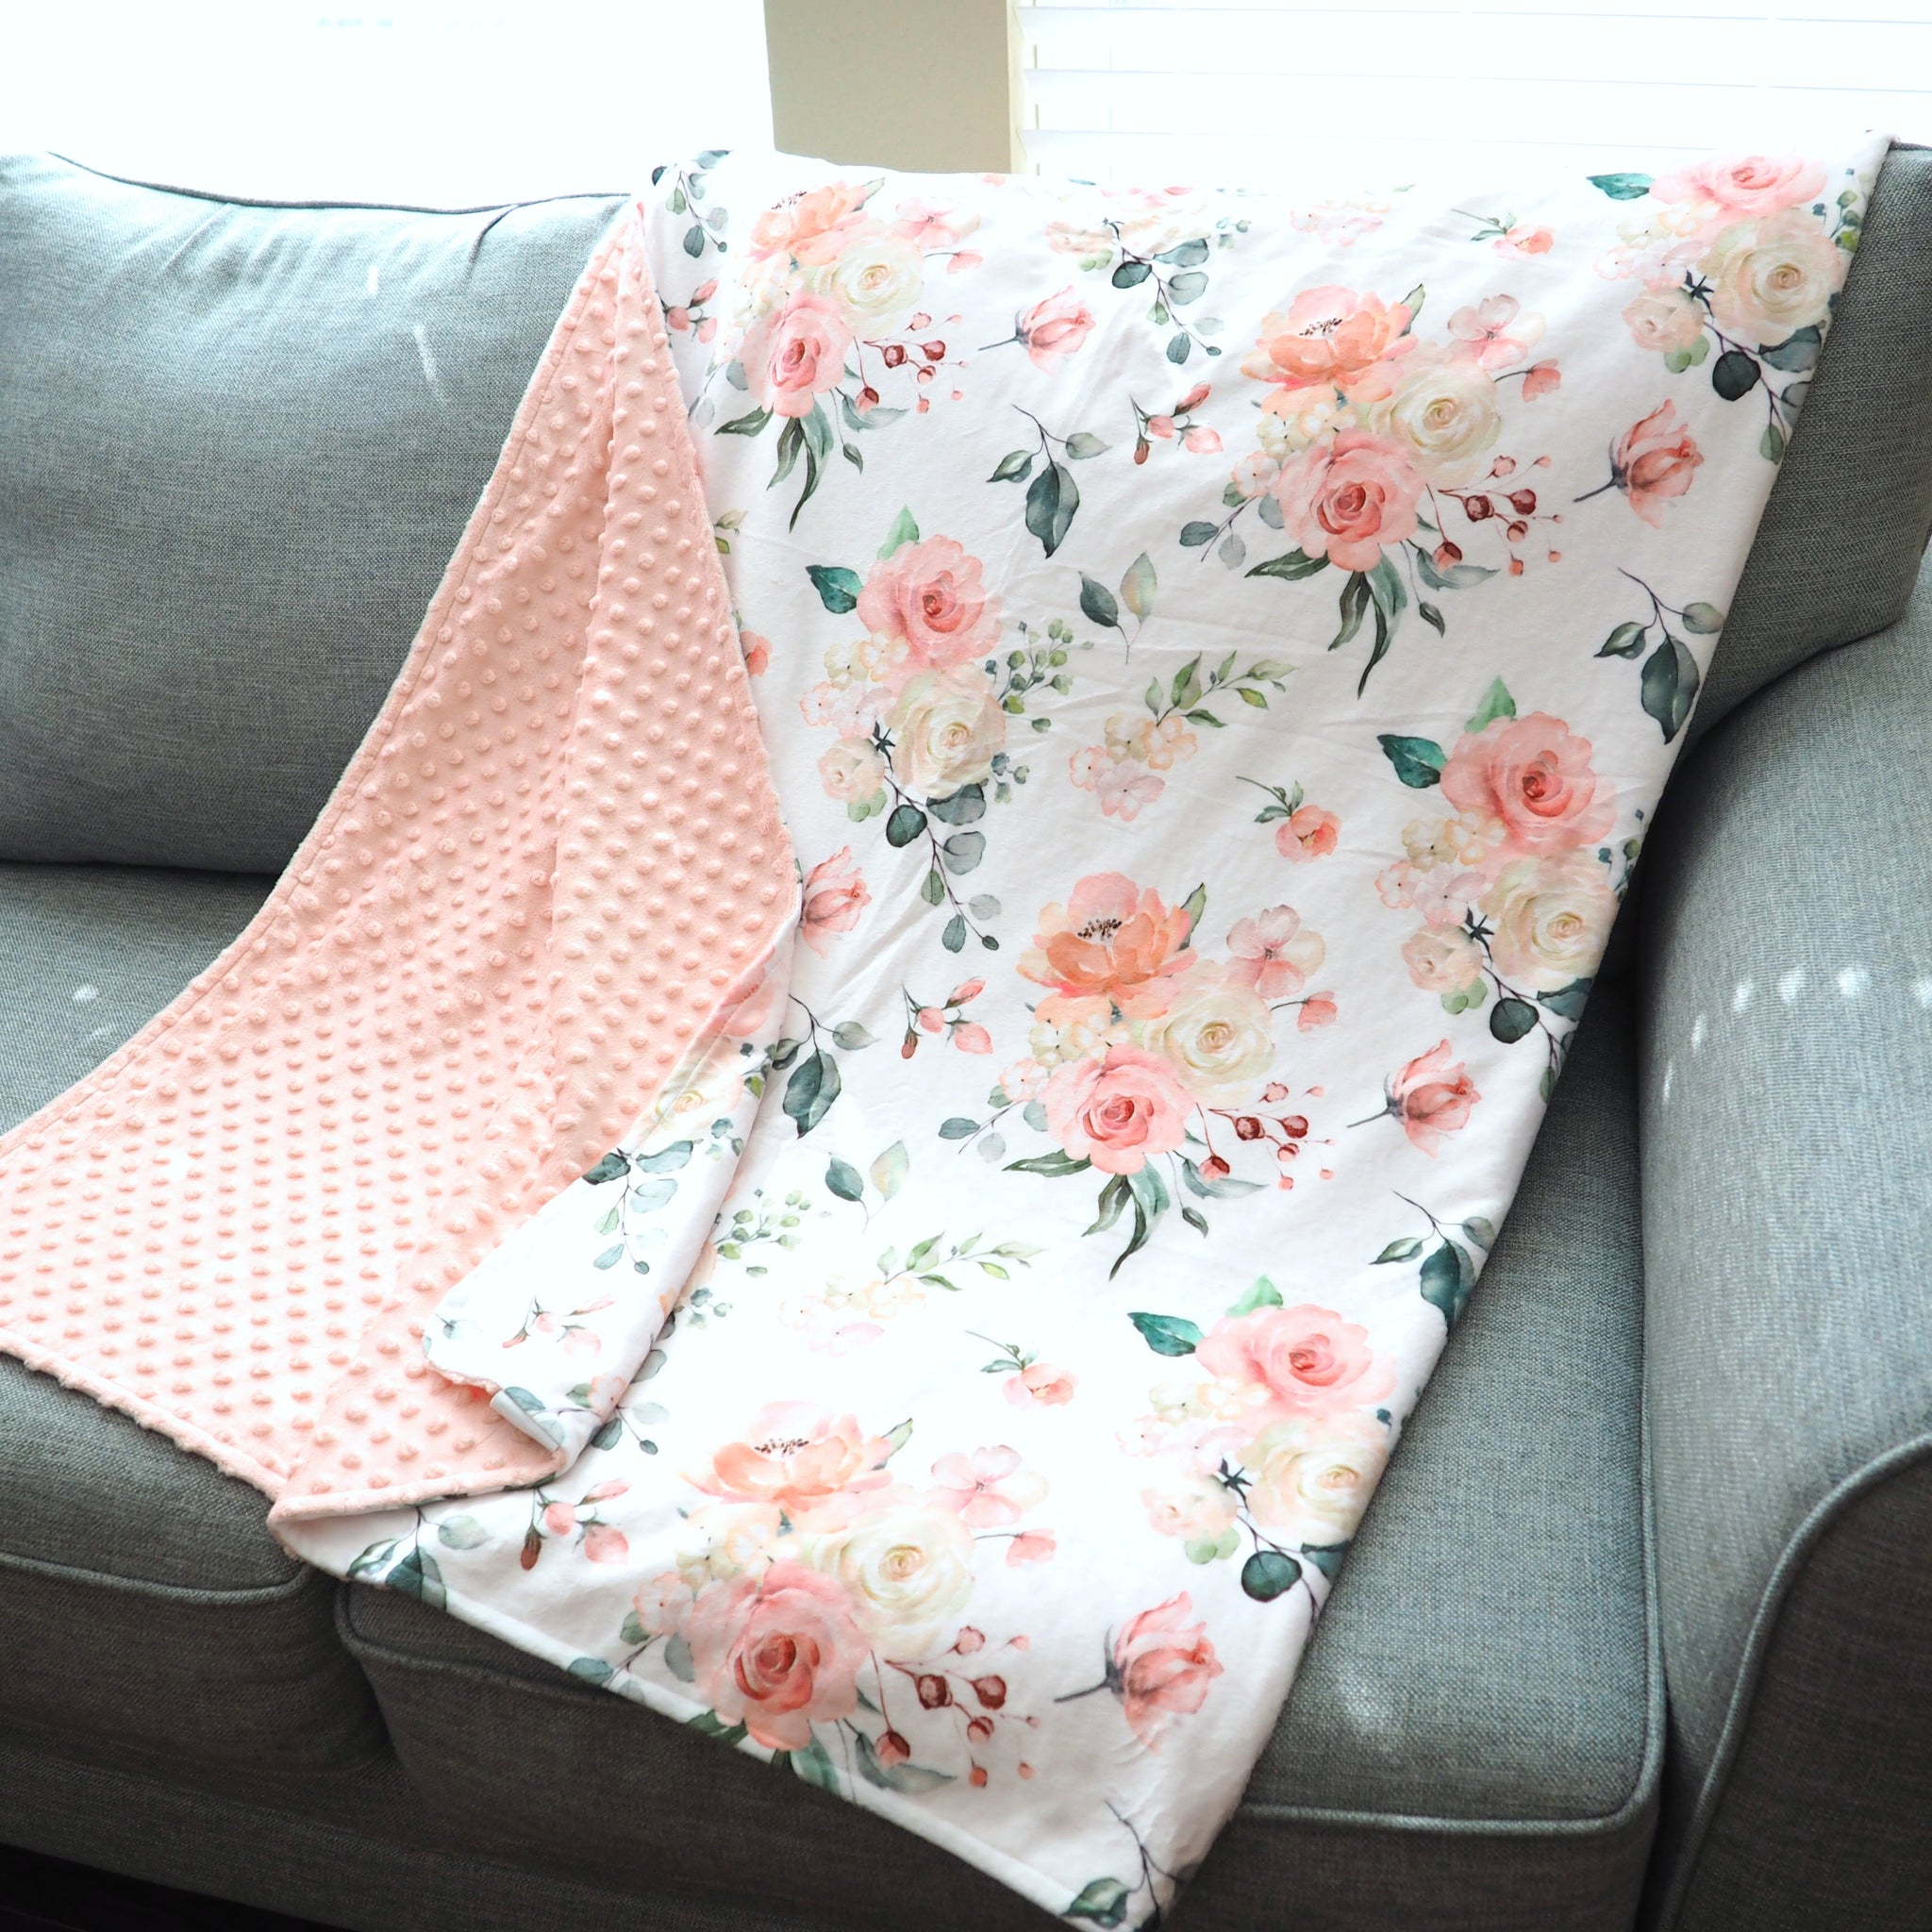 Adult Throw Minky Blanket - Peach Floral (2 Sizes Available)